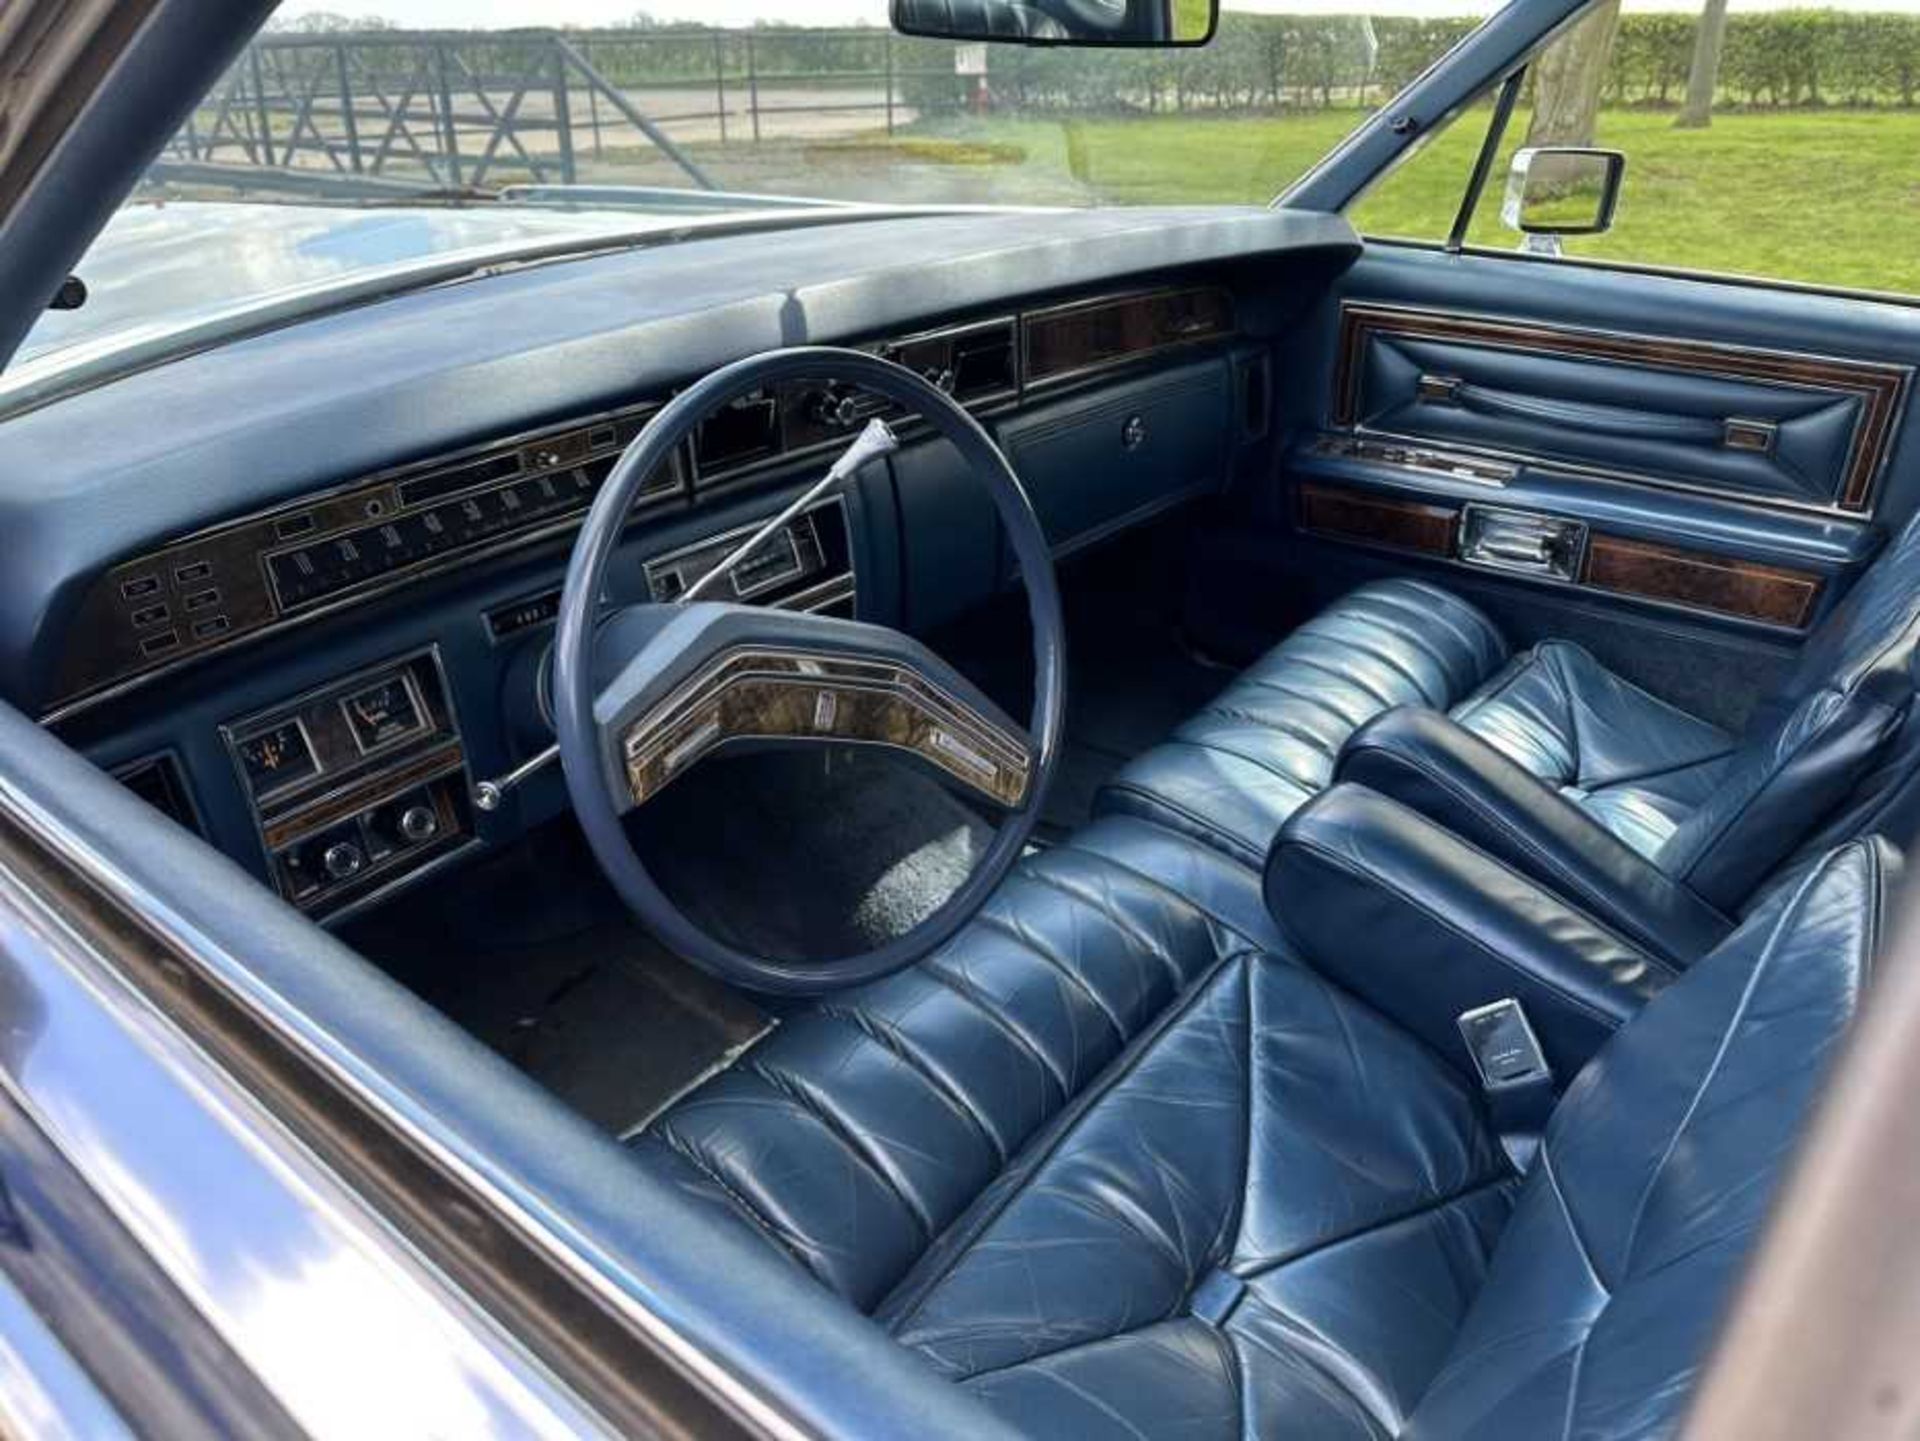 1977 Lincoln Continental Spitzer 4 door sedan, Registration UKE 743R. This very imposing classic Ame - Image 11 of 17